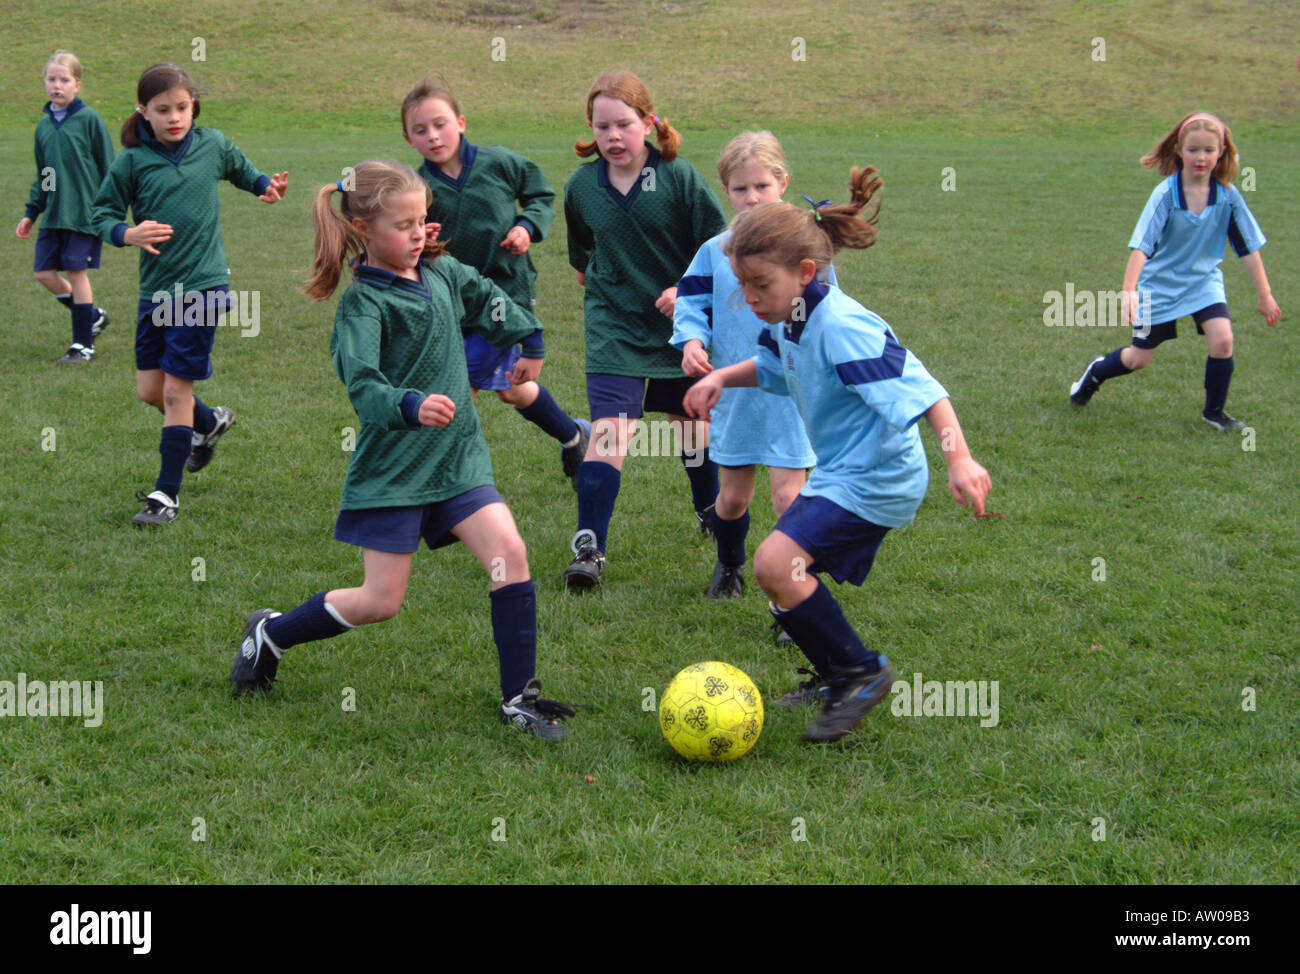 Two primary school girls teams playing soccer on a public sports field in Hobart, Tasmania Stock Photo